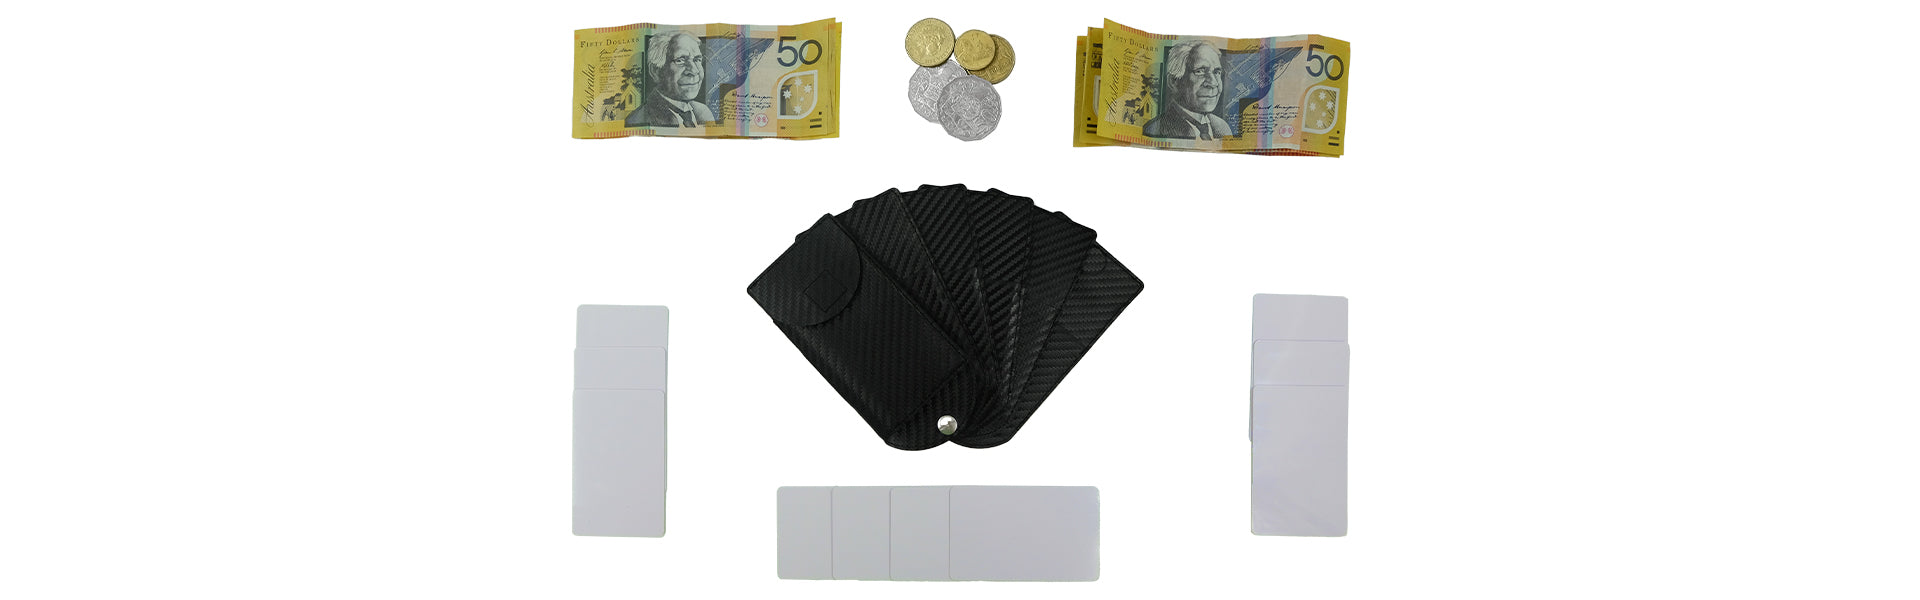 Carbon Fiber Fanning Wallet with cards and cash